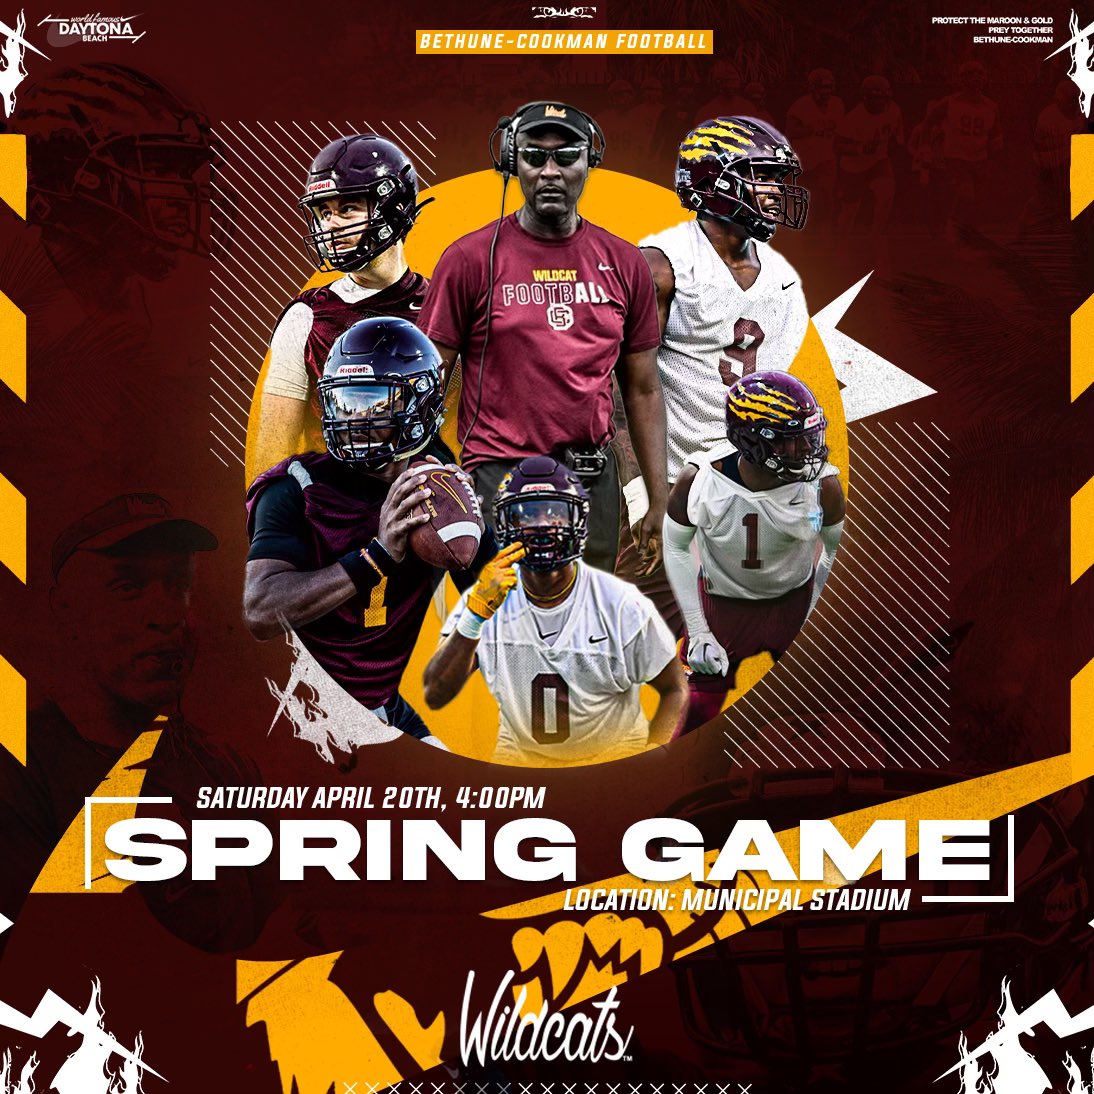 Cats are back in action! #HailWildcats